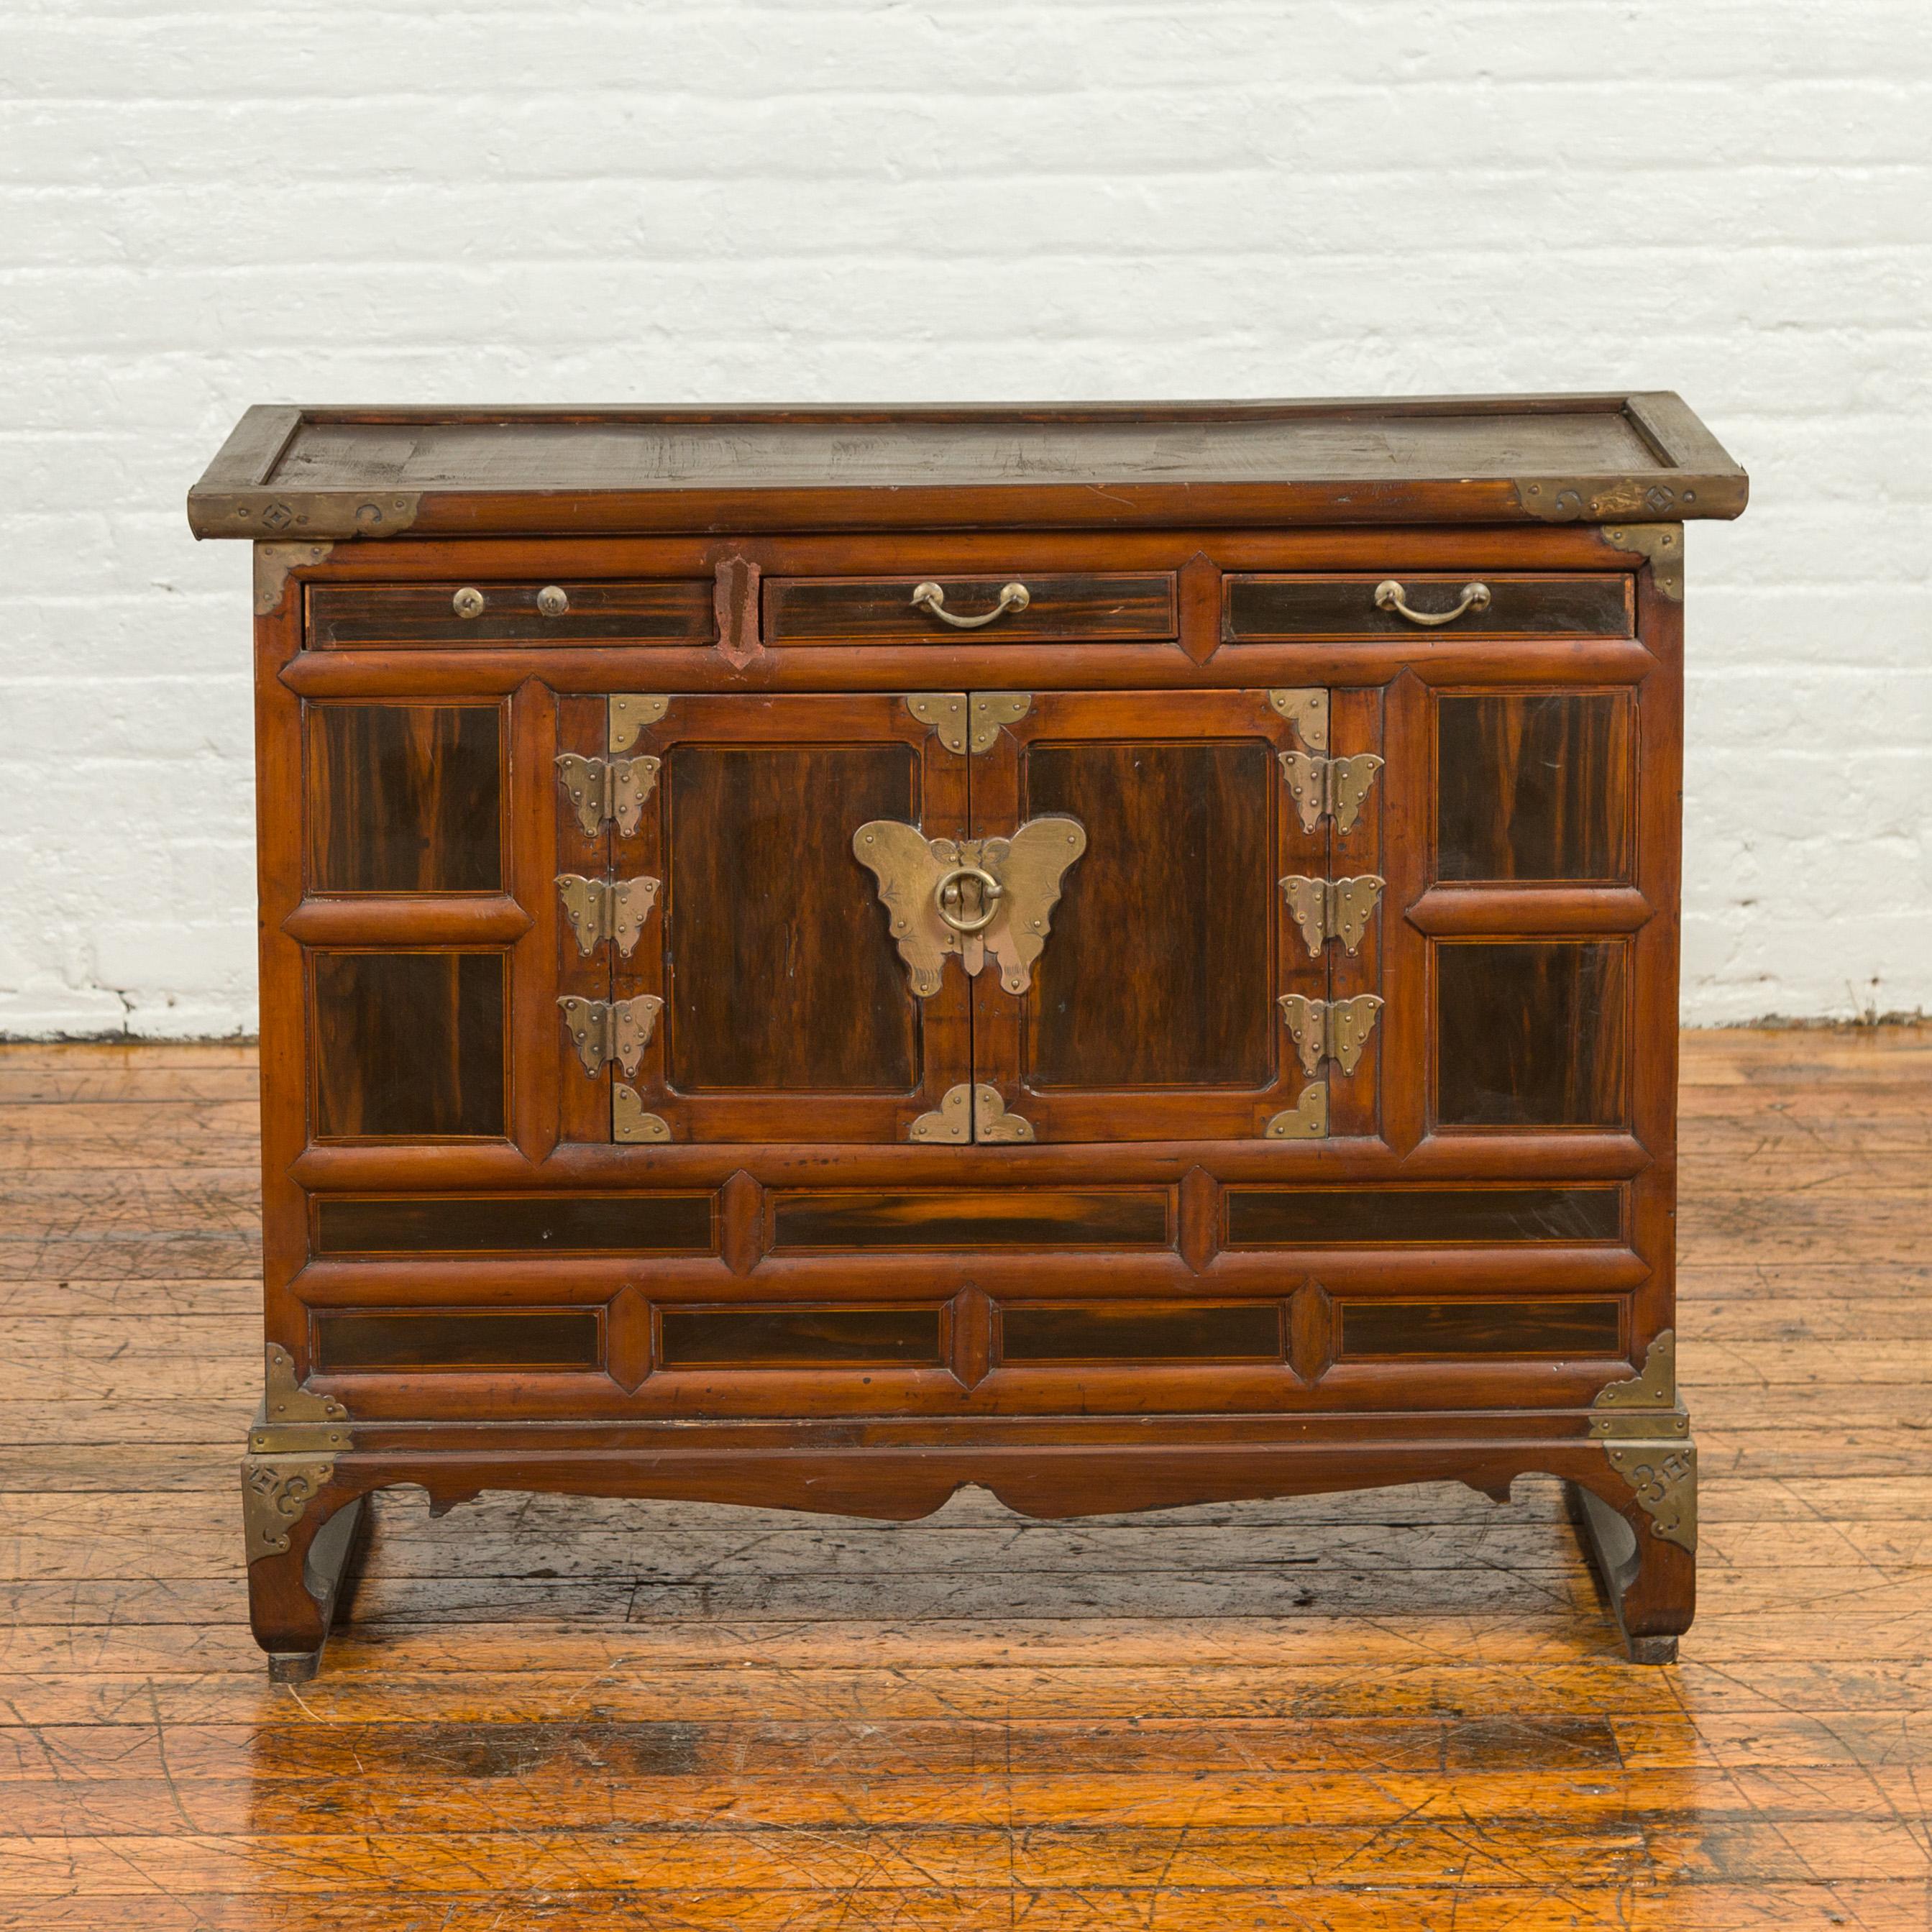 An antique Korean cabinet from the 19th century, with three drawers, double doors, brass butterfly hardware and horsehoof feet. Born in Korea during the 19th century, this wooden cabinet features a rectangular top with slightly recessed central